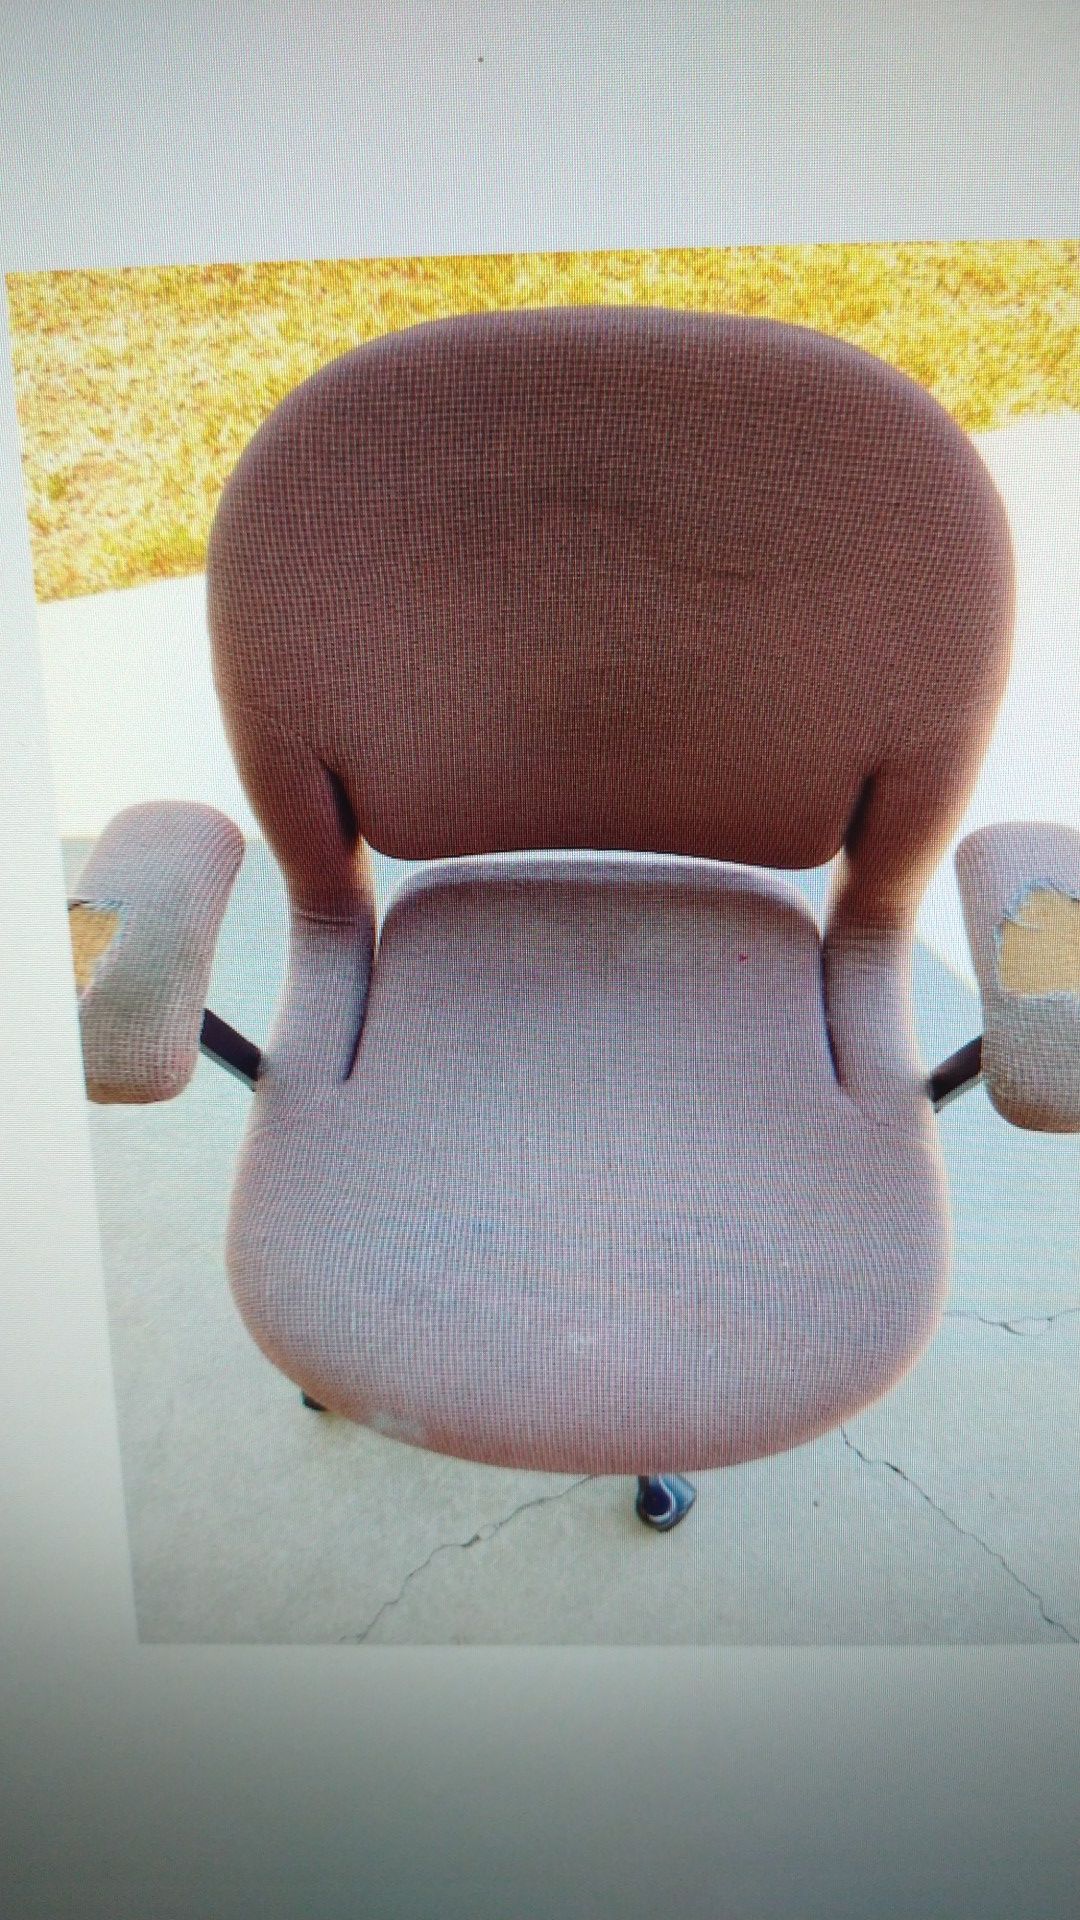 Office chair used $25